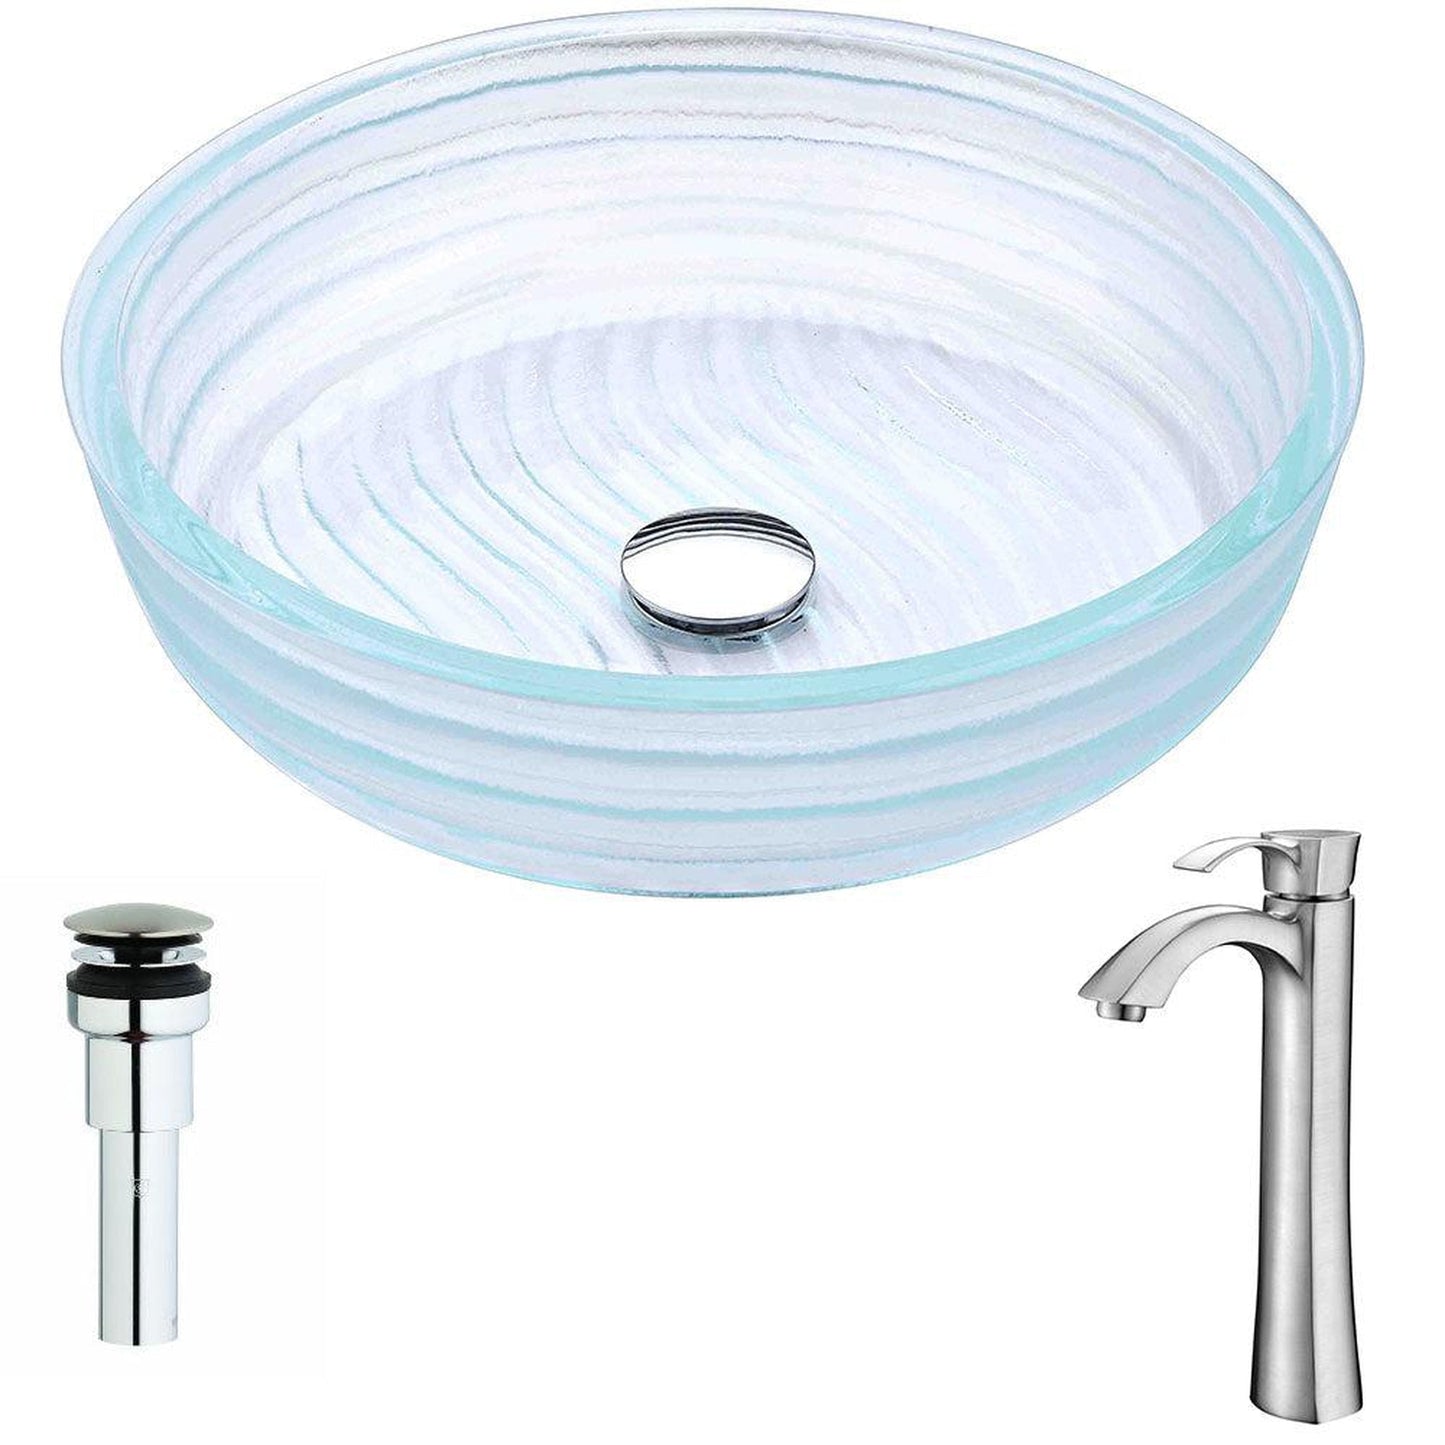 ANZZI Canta Series 17" x 17" Cylinder Shape Translucent Crystal Deco-Glass Vessel Sink With Chrome Pop-Up Drain and Brushed Nickel Harmony Faucet